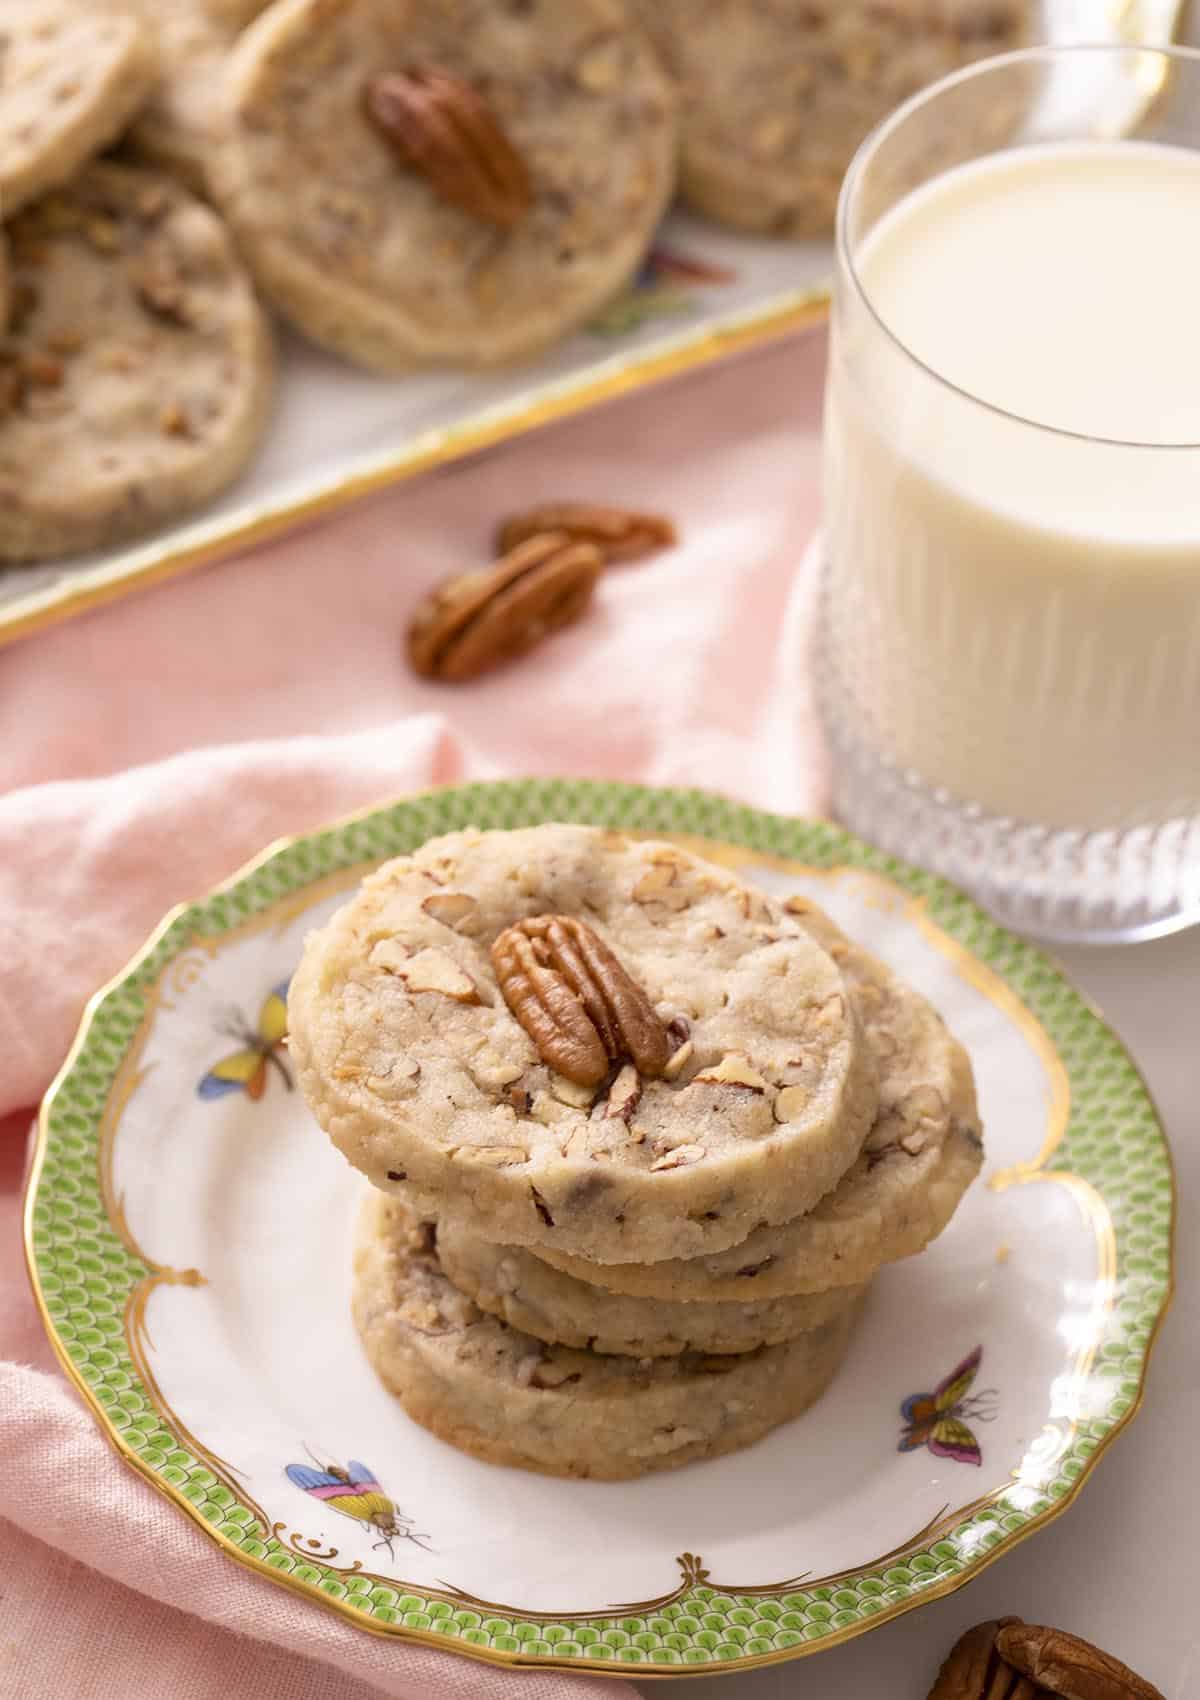 A stack of pecan sandies on a plate next to a glass of milk.